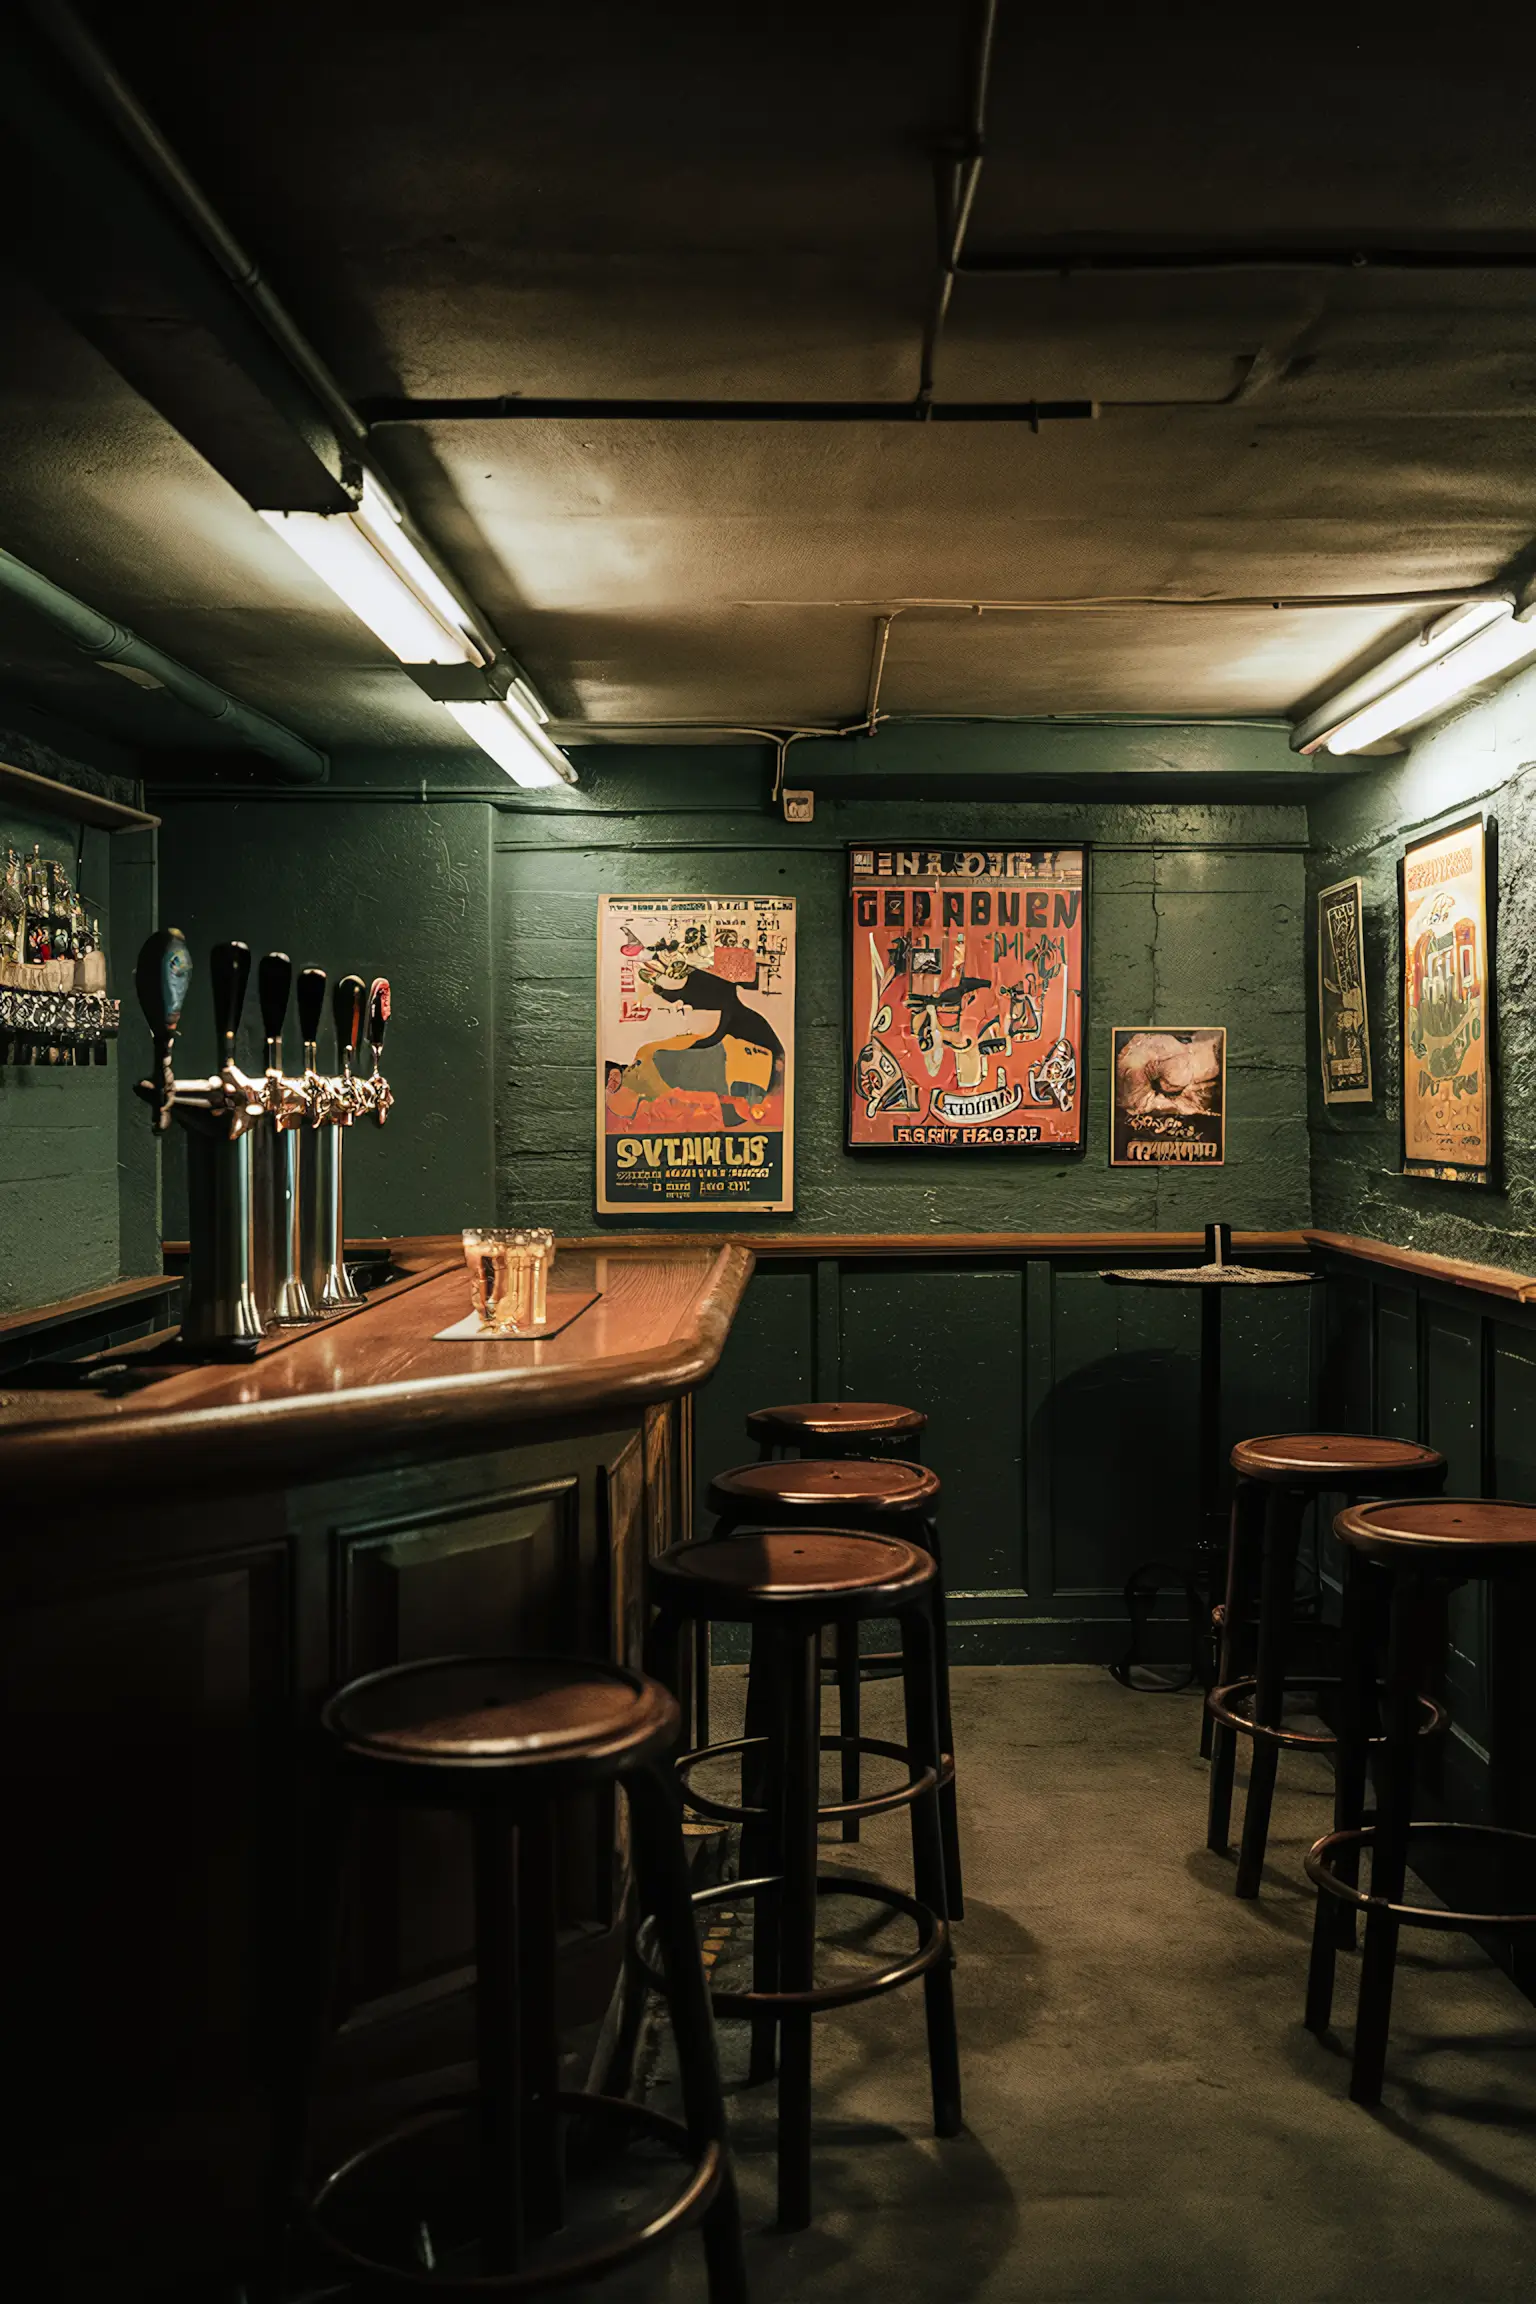 Pub-style basement bar with wooden bar counter and beer taps.